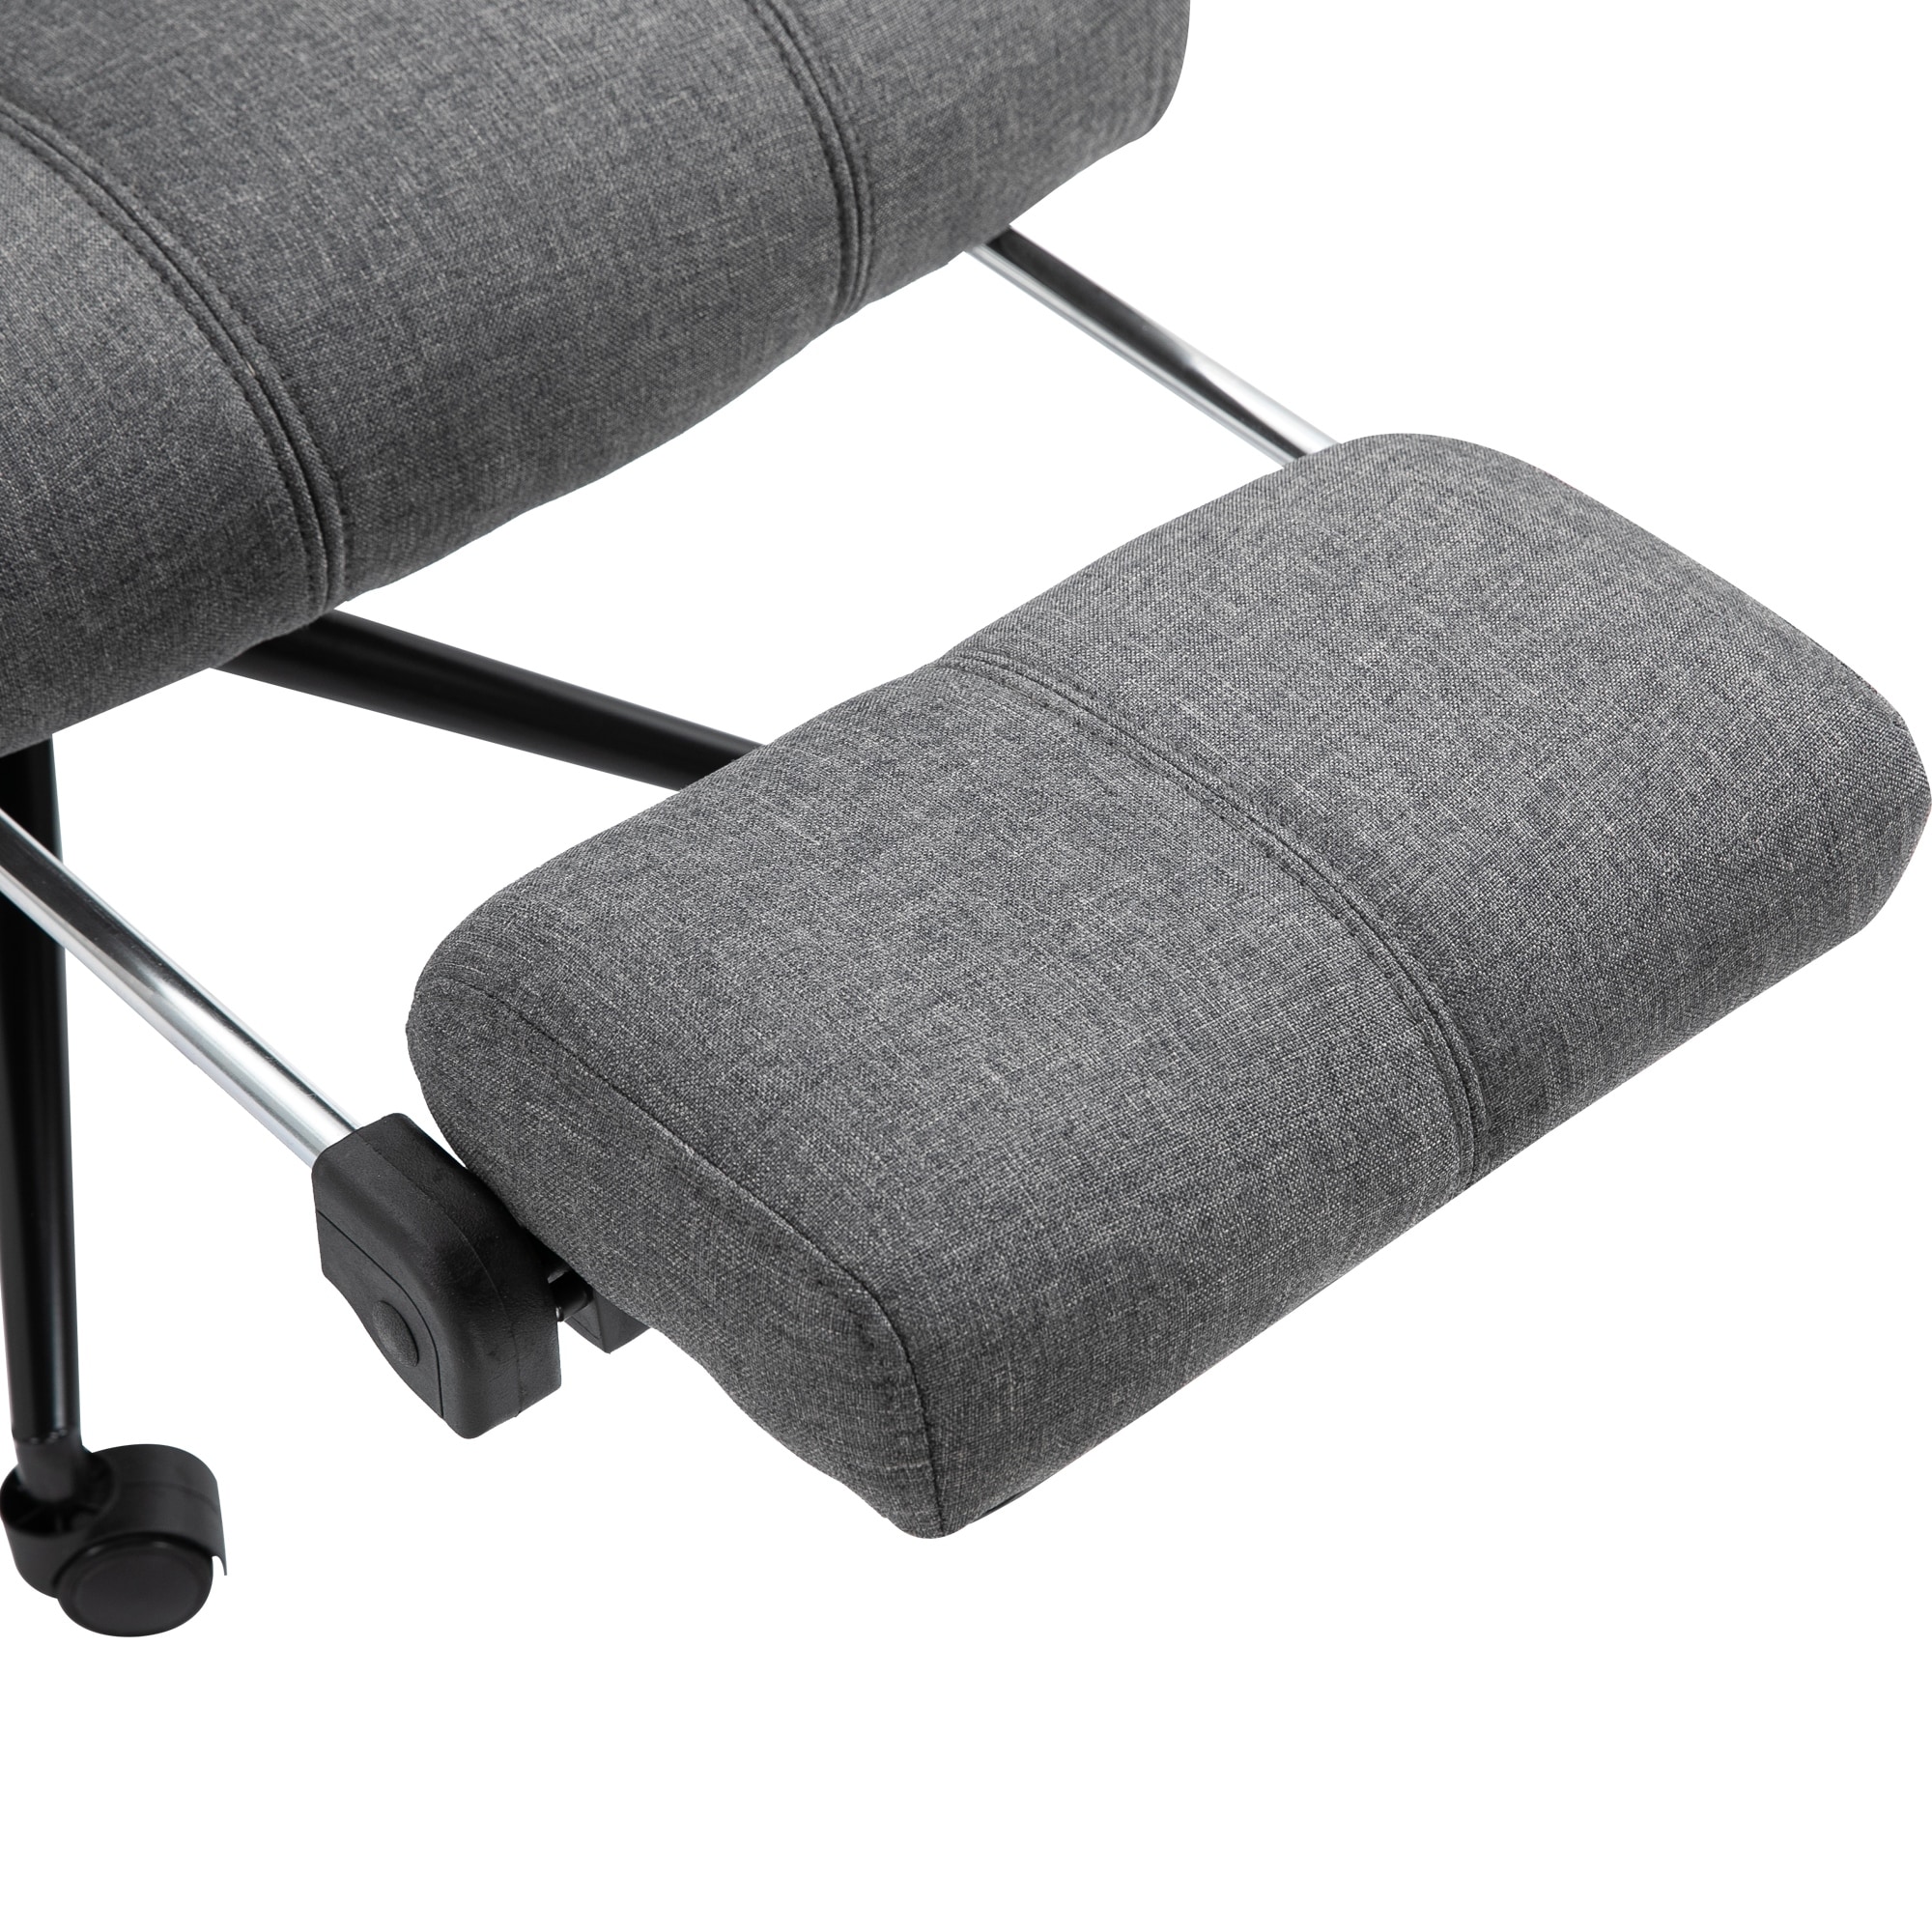 Vinsetto Executive Linen Fabric Home Office Chair with Retractable Footrest Headrest and Lumbar Support - Black